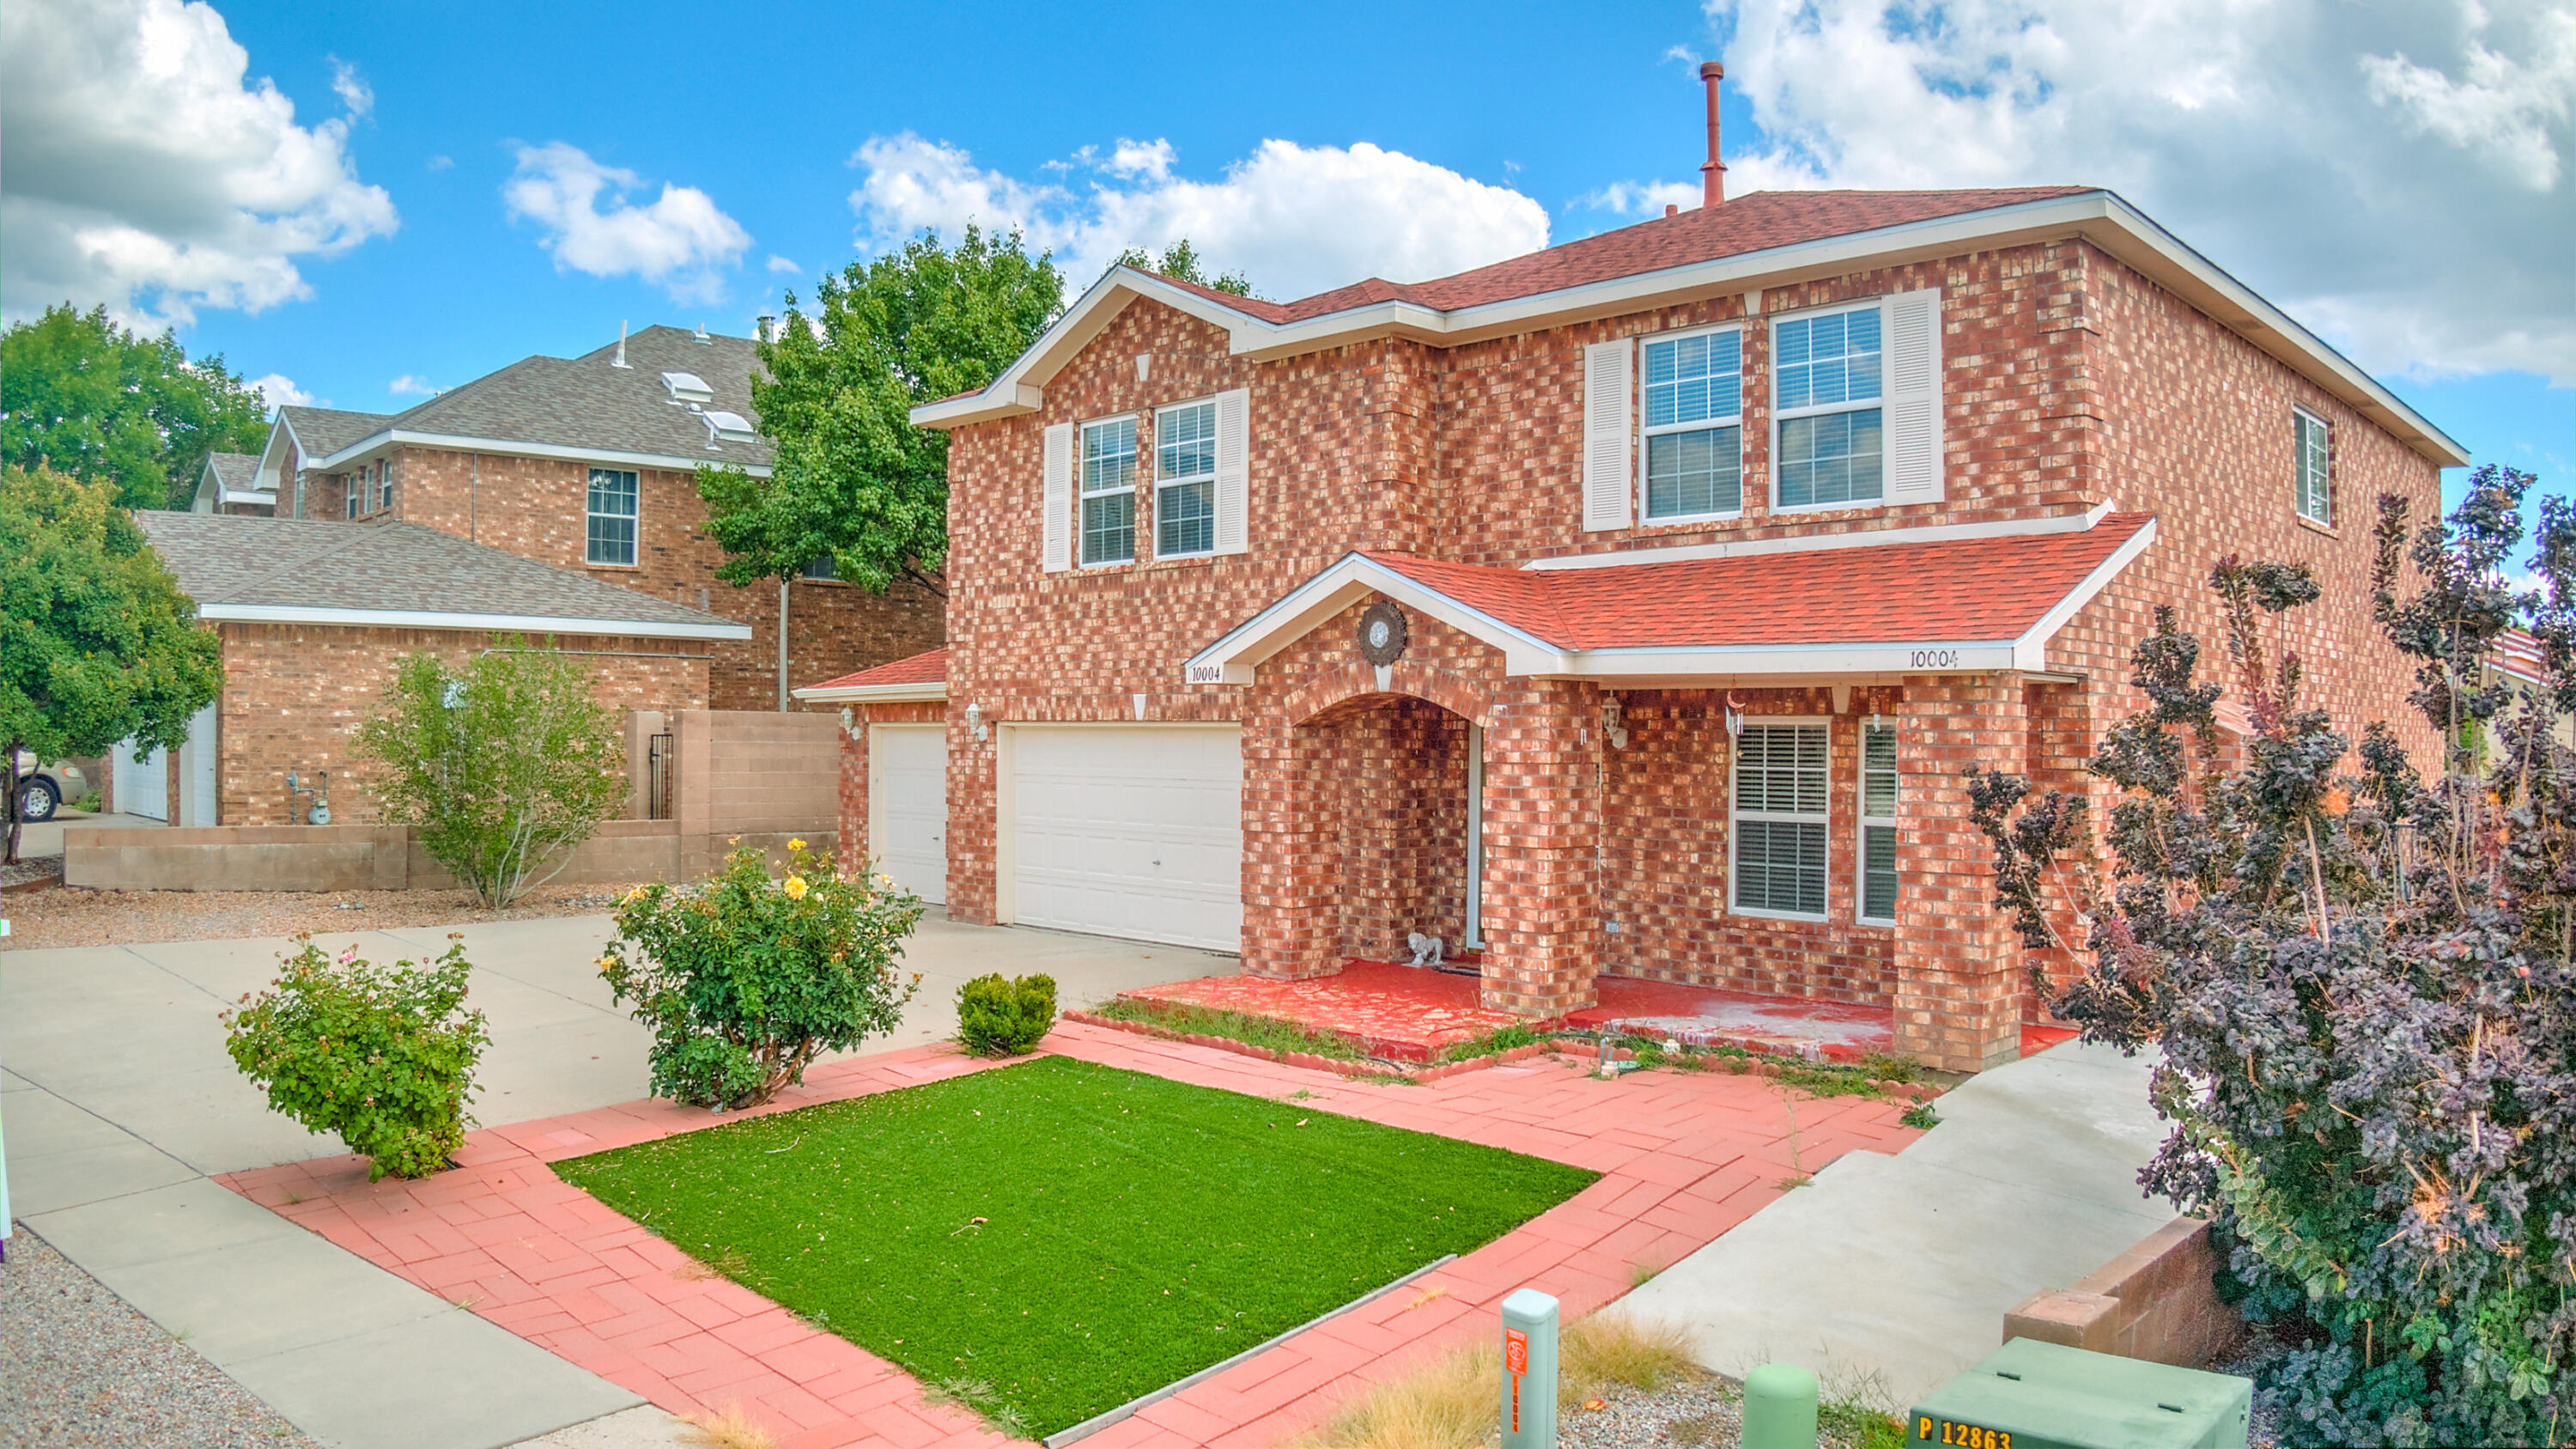 Welcome home!Gorgeous 2story,4 BRs,2.5 Ba,3 Car garage all brick house, nestled in a cul-de-sac within Quintessence neighborhood.This meticulously cared for home is conveniently located,and is in the La Cueva school district. 3rd car garage opens to backyard for a RV park. Over $120,000 in upgrades,including new roof!open-floor plan;gas fireplace; wood flooring; casual country kitchen with custom cabinets & spacious family room opening to covered patio,landscaped backyard with stamped concrete, fruit trees,flower beds with zero maintenance;solar-lit gazebo,an outdoor oasis that's perfect for entertaining and relaxing; gas line for grille hookup. Upstairs features loft,master suite is majestically built with sitting area overlooking city lights & mountains,luxury bathroom wit walk-in closet